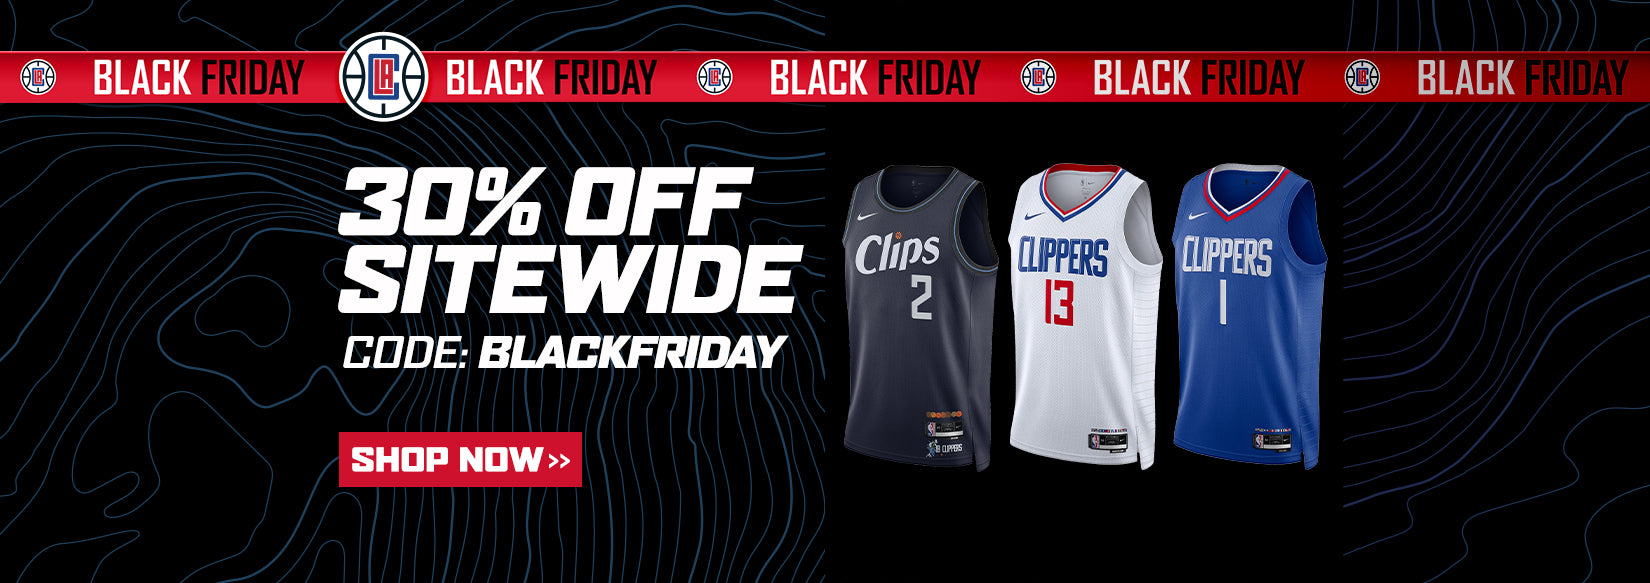 Black Friday 30% Off Sitewide CODE: BLACKFRIDAY SHOP NOW